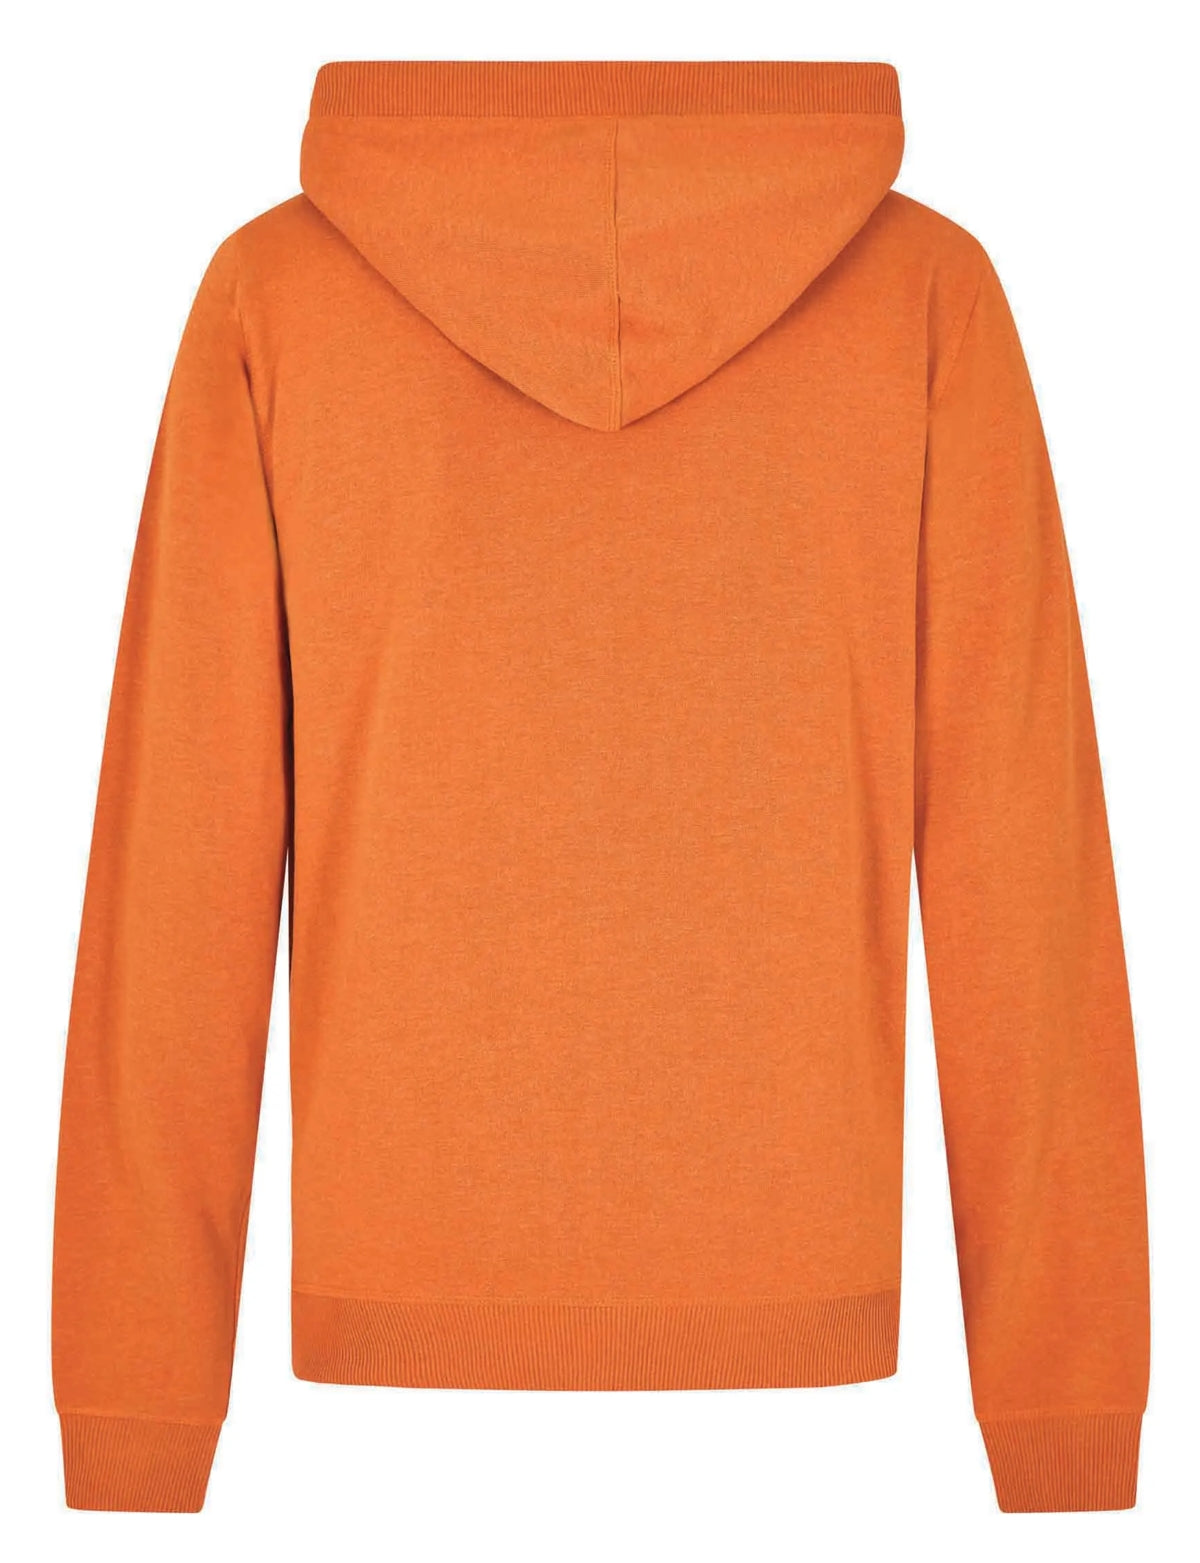 Men's pop over hooded Bryant sweatshirt from Weird Fish in a bright Brick Orange colour.